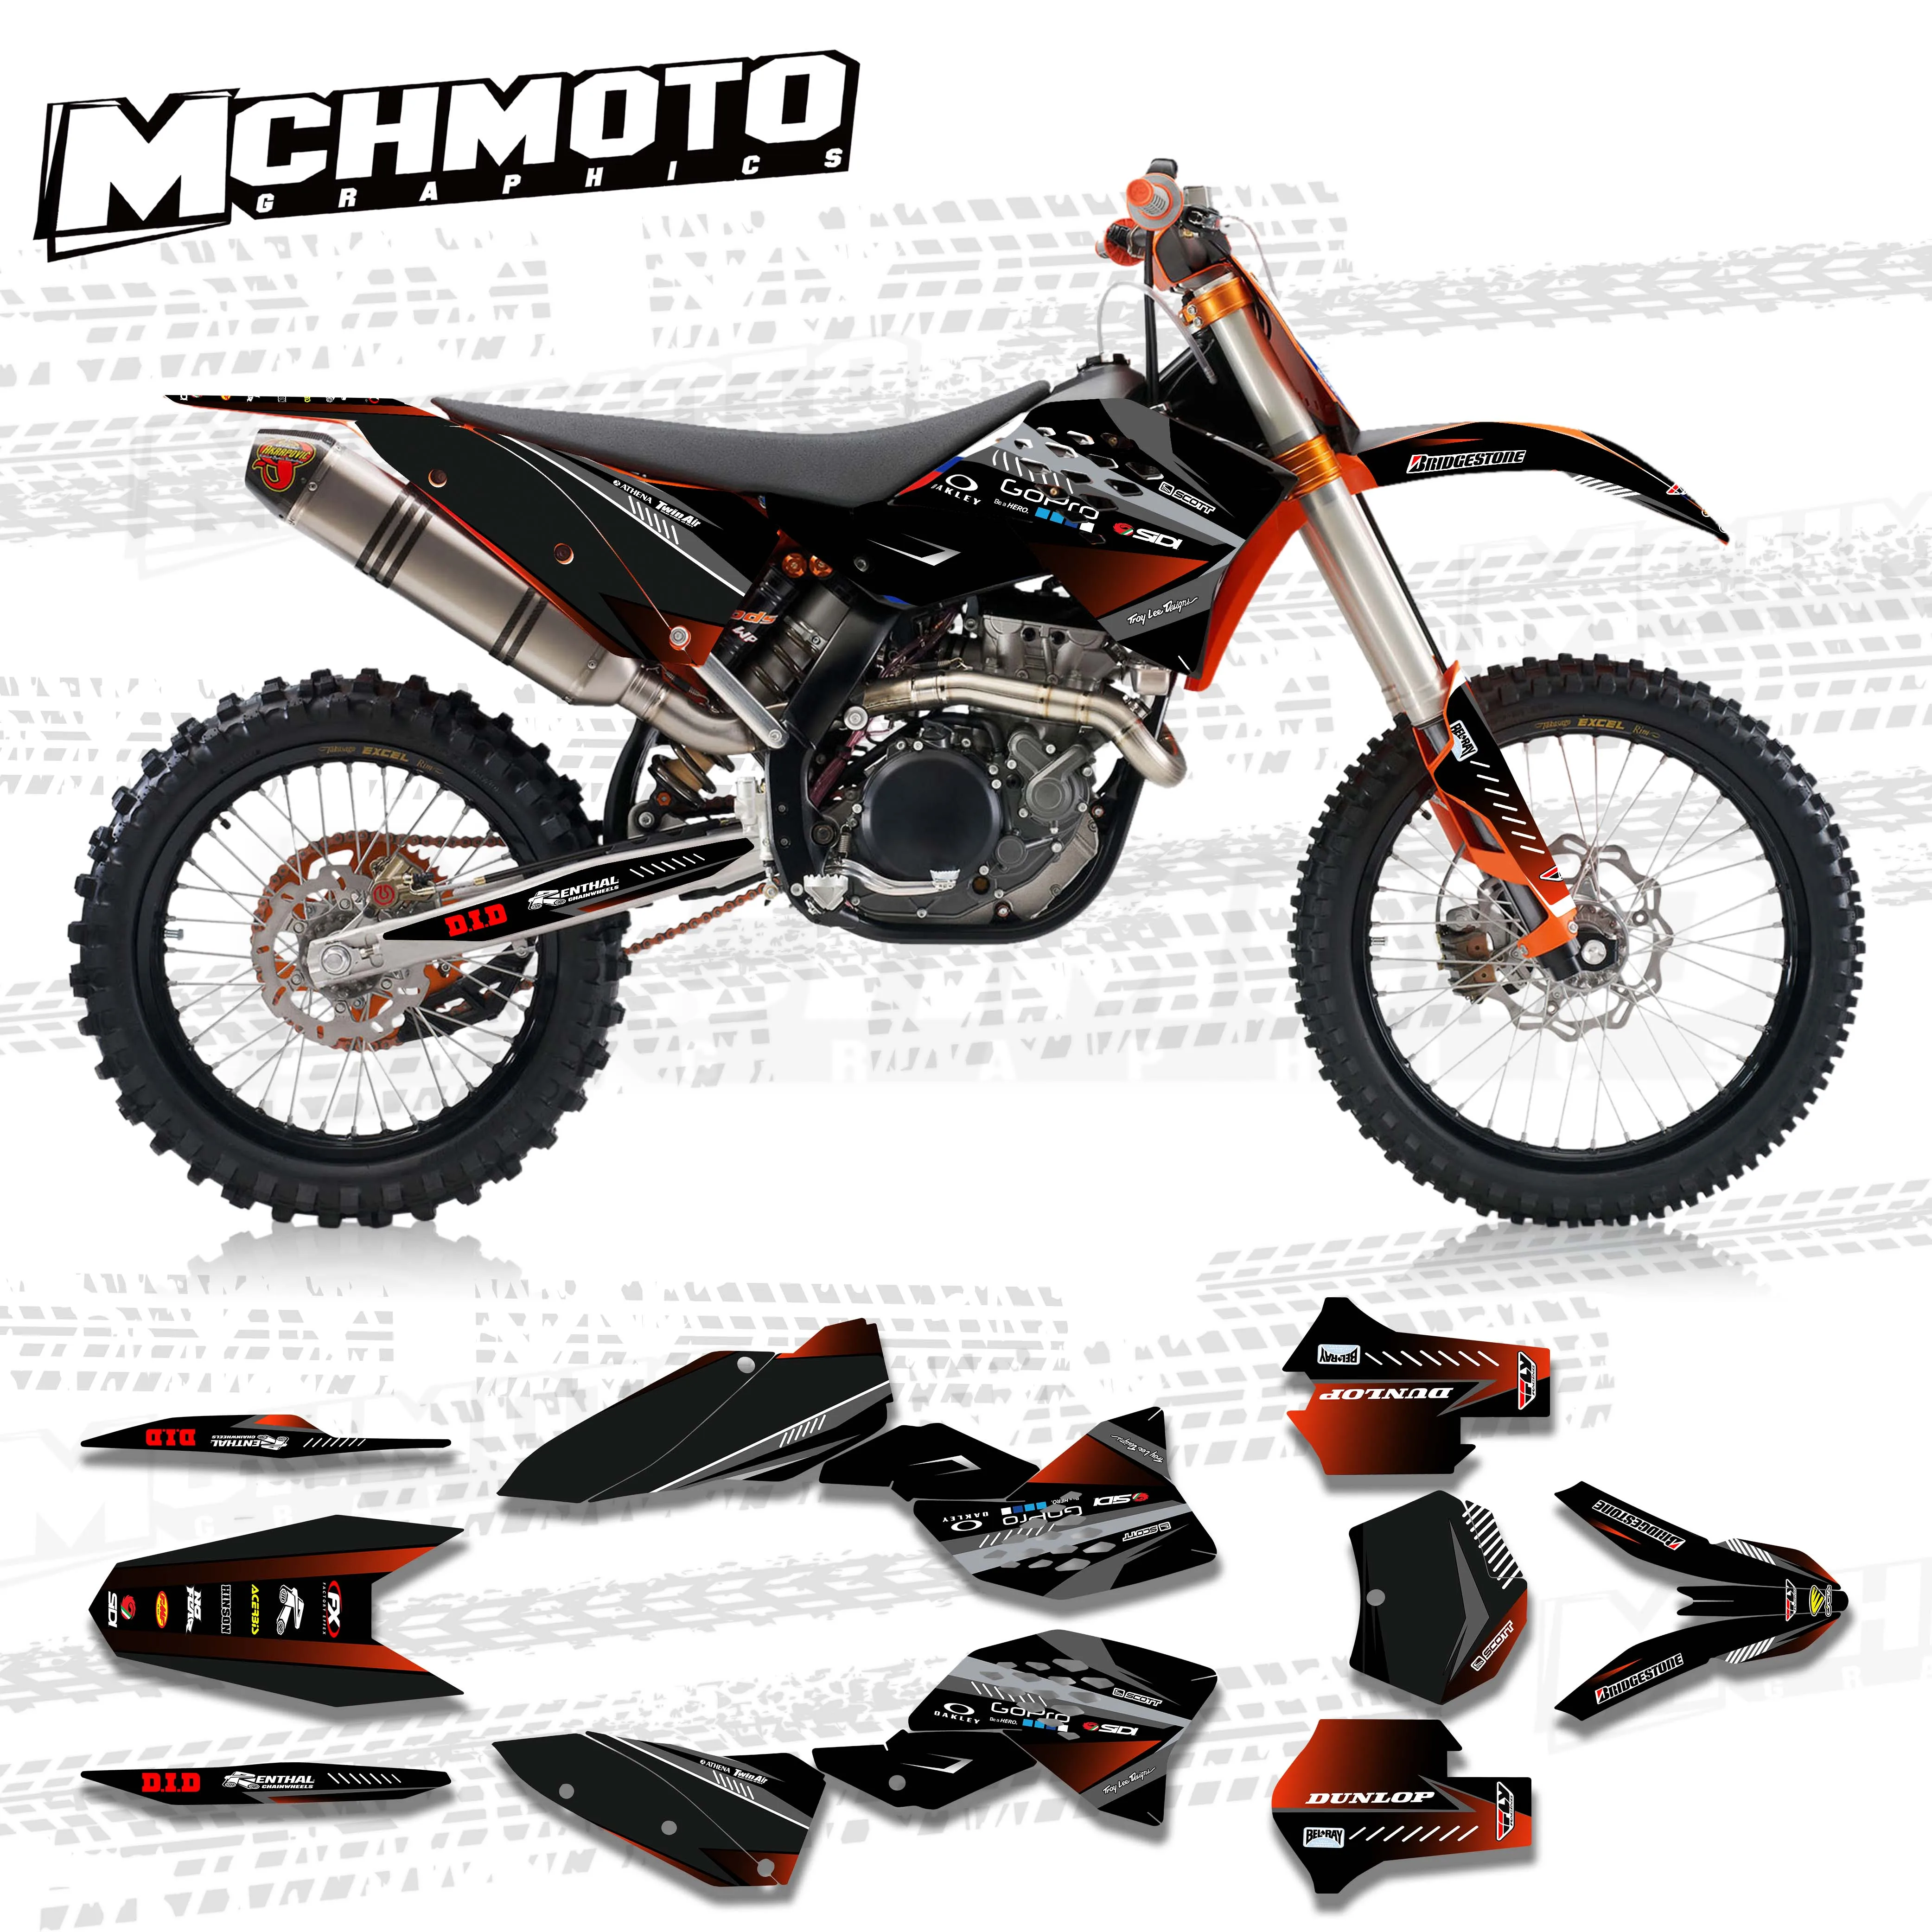 MCHMFG For KTM EXC SXF125 250 300 450 530 2008 2009 2010 2011 Full Graphics Decals Stickers Motorcycle Background